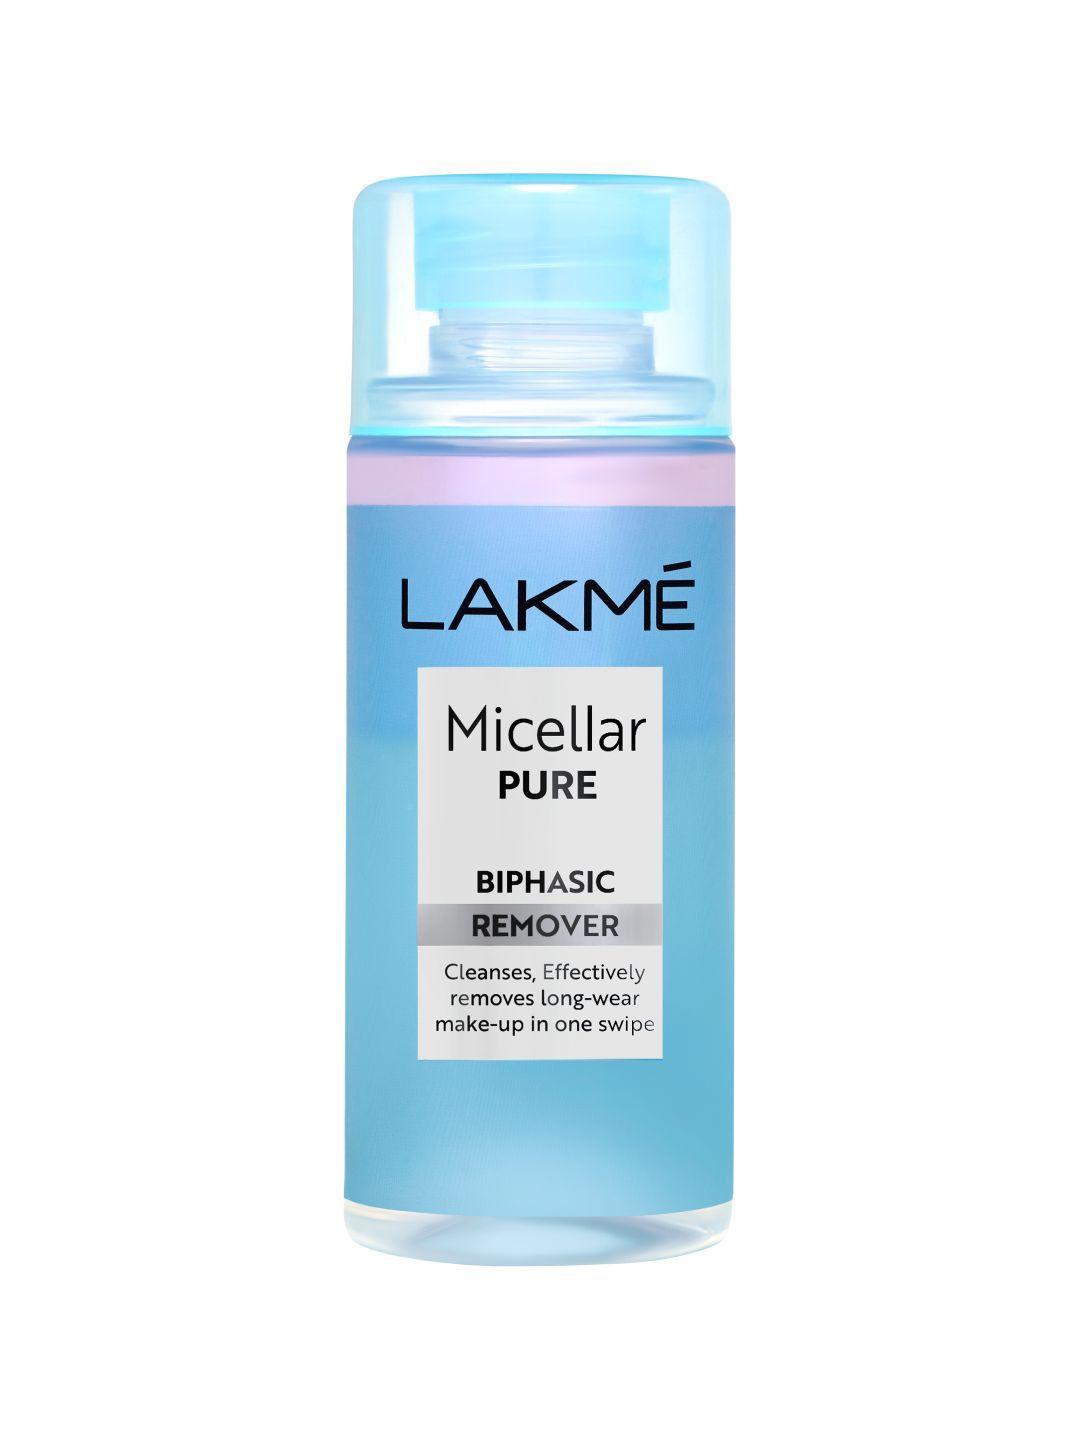 lakme micellar pure bi-phasic remover for makeup removal - 200ml